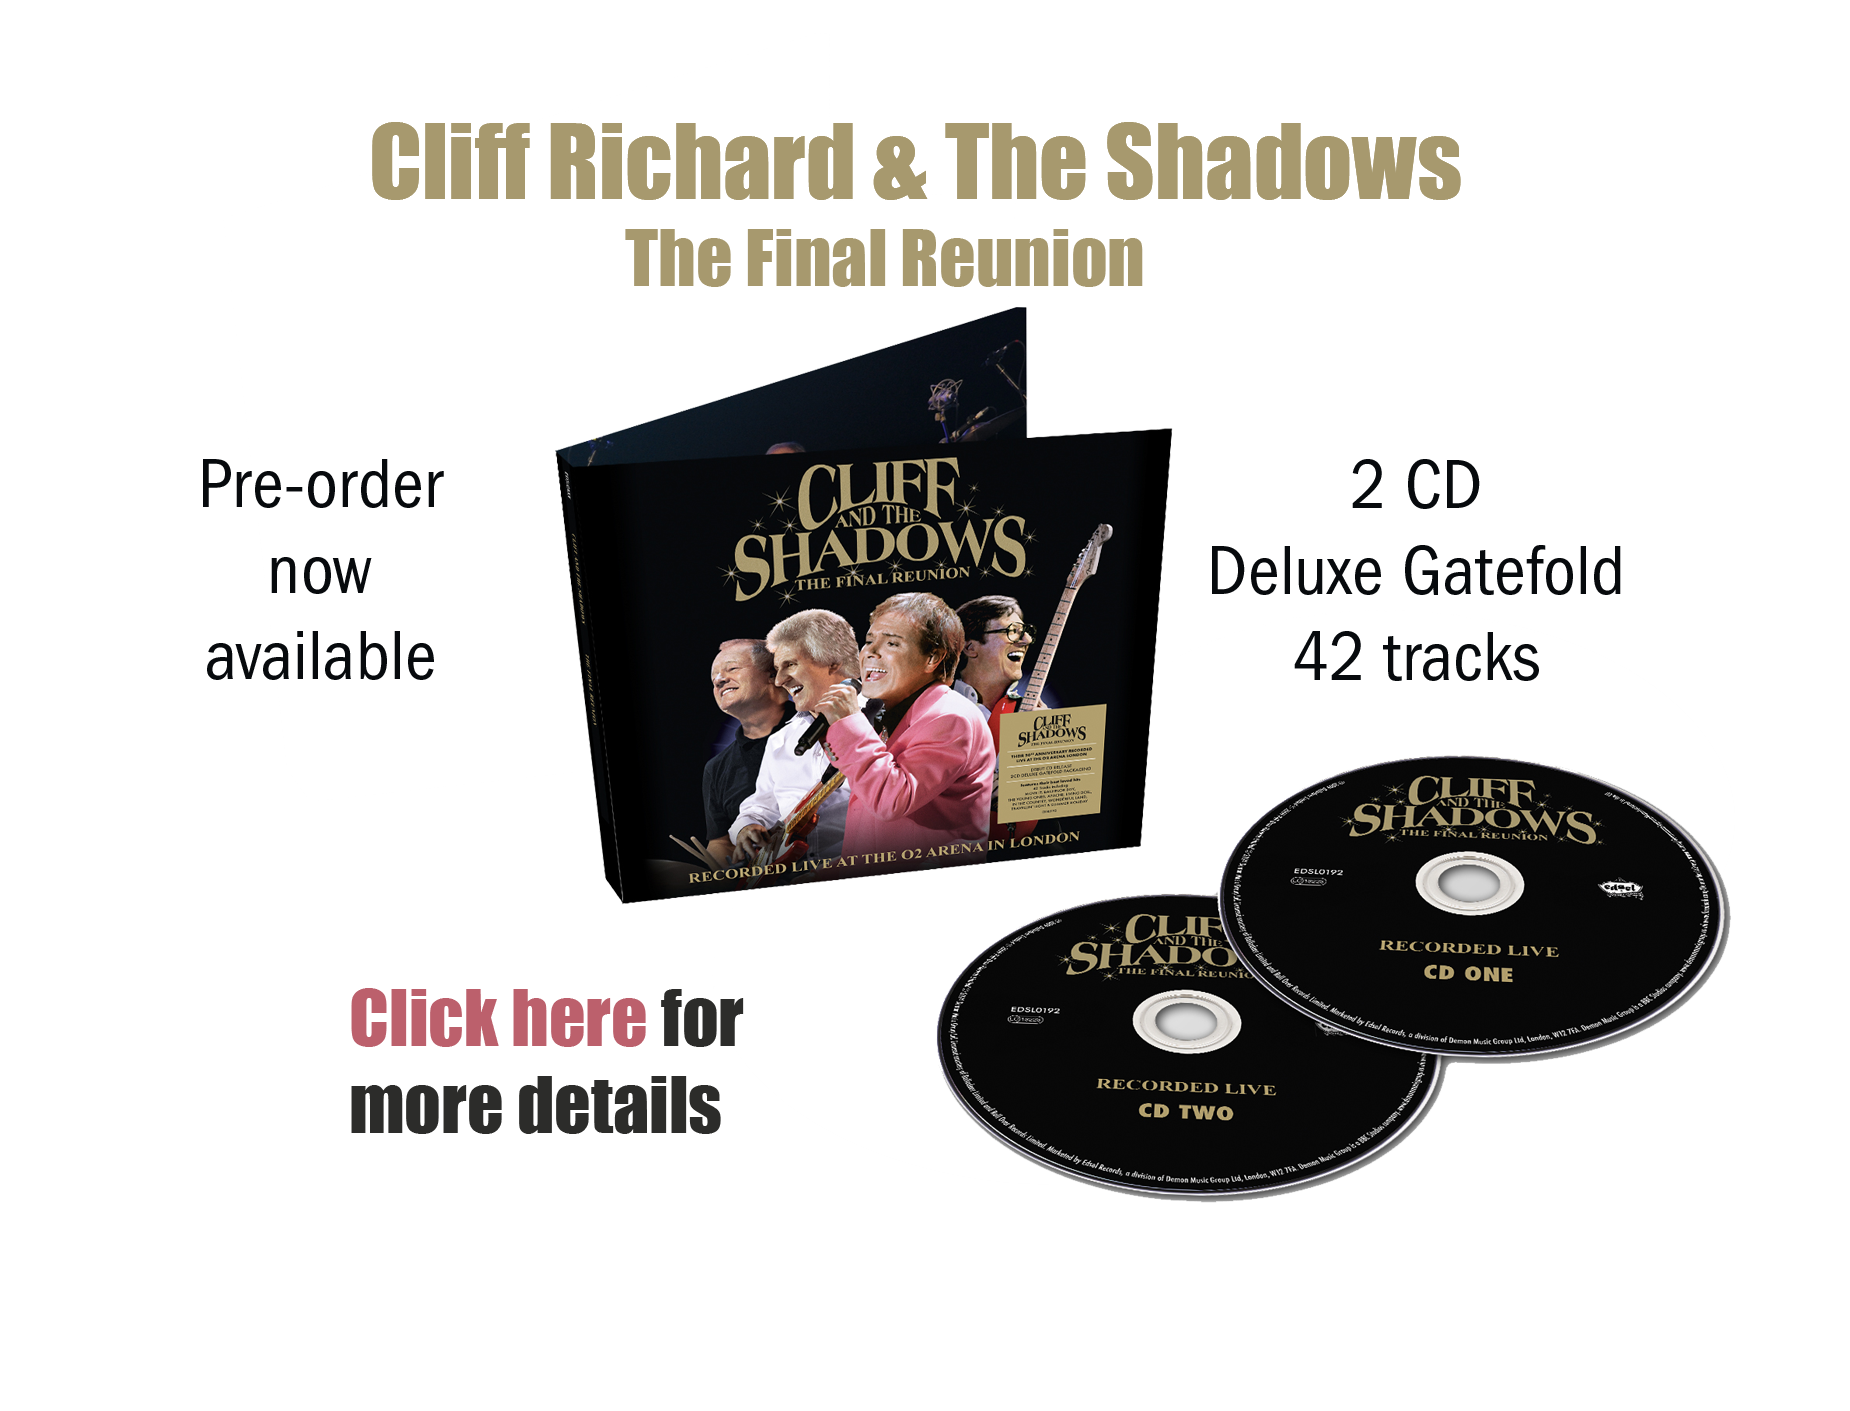 Cliff Richard & The Shadows - 'The Final Reunion' - available now